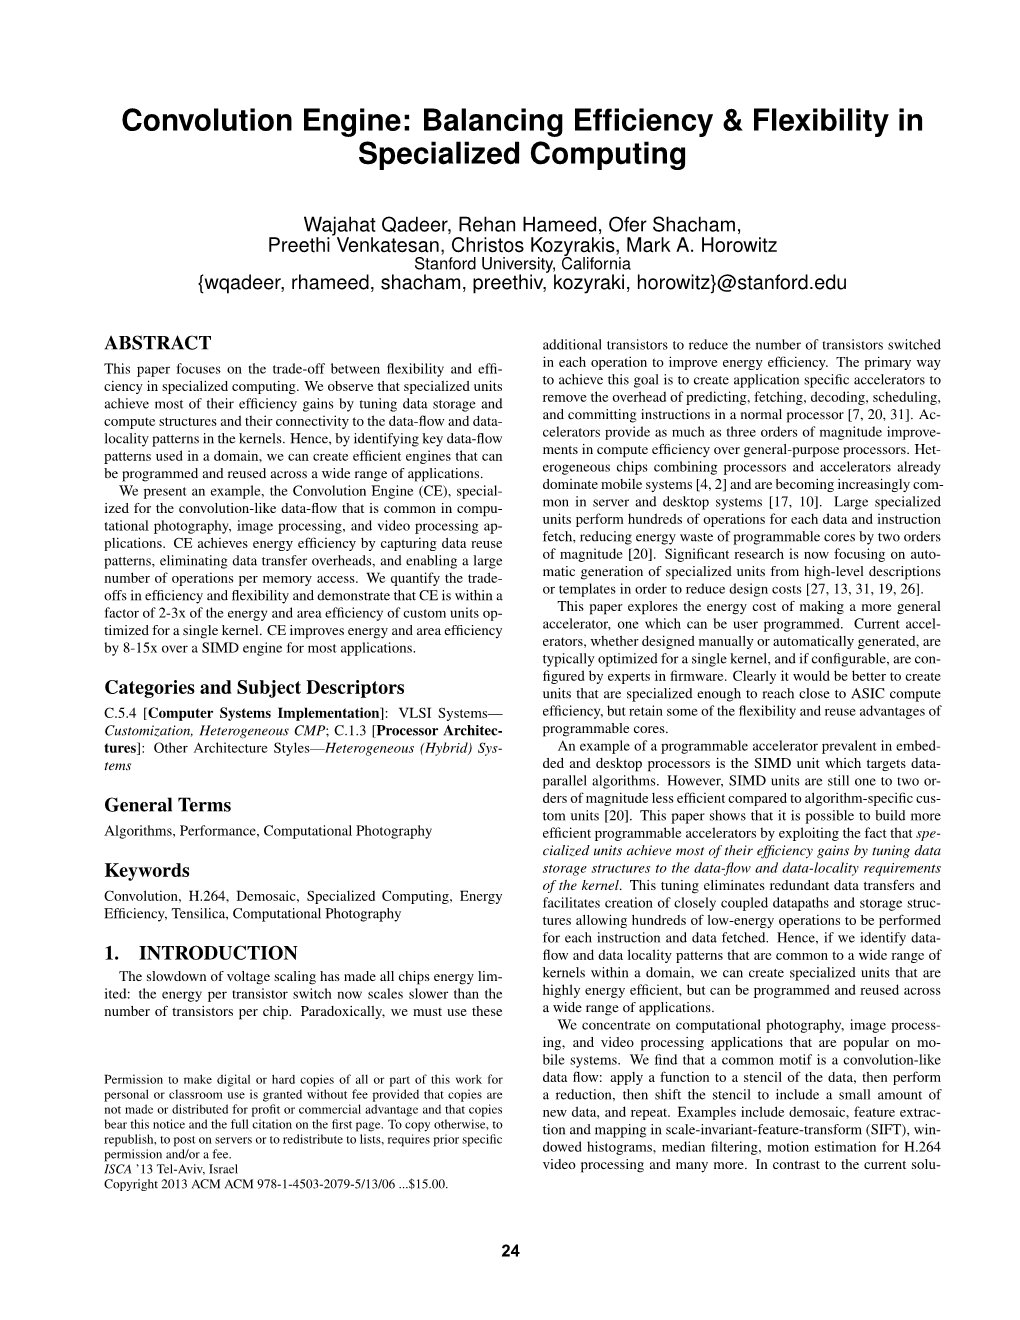 Balancing Efficiency and Flexibility in Specialized Computing